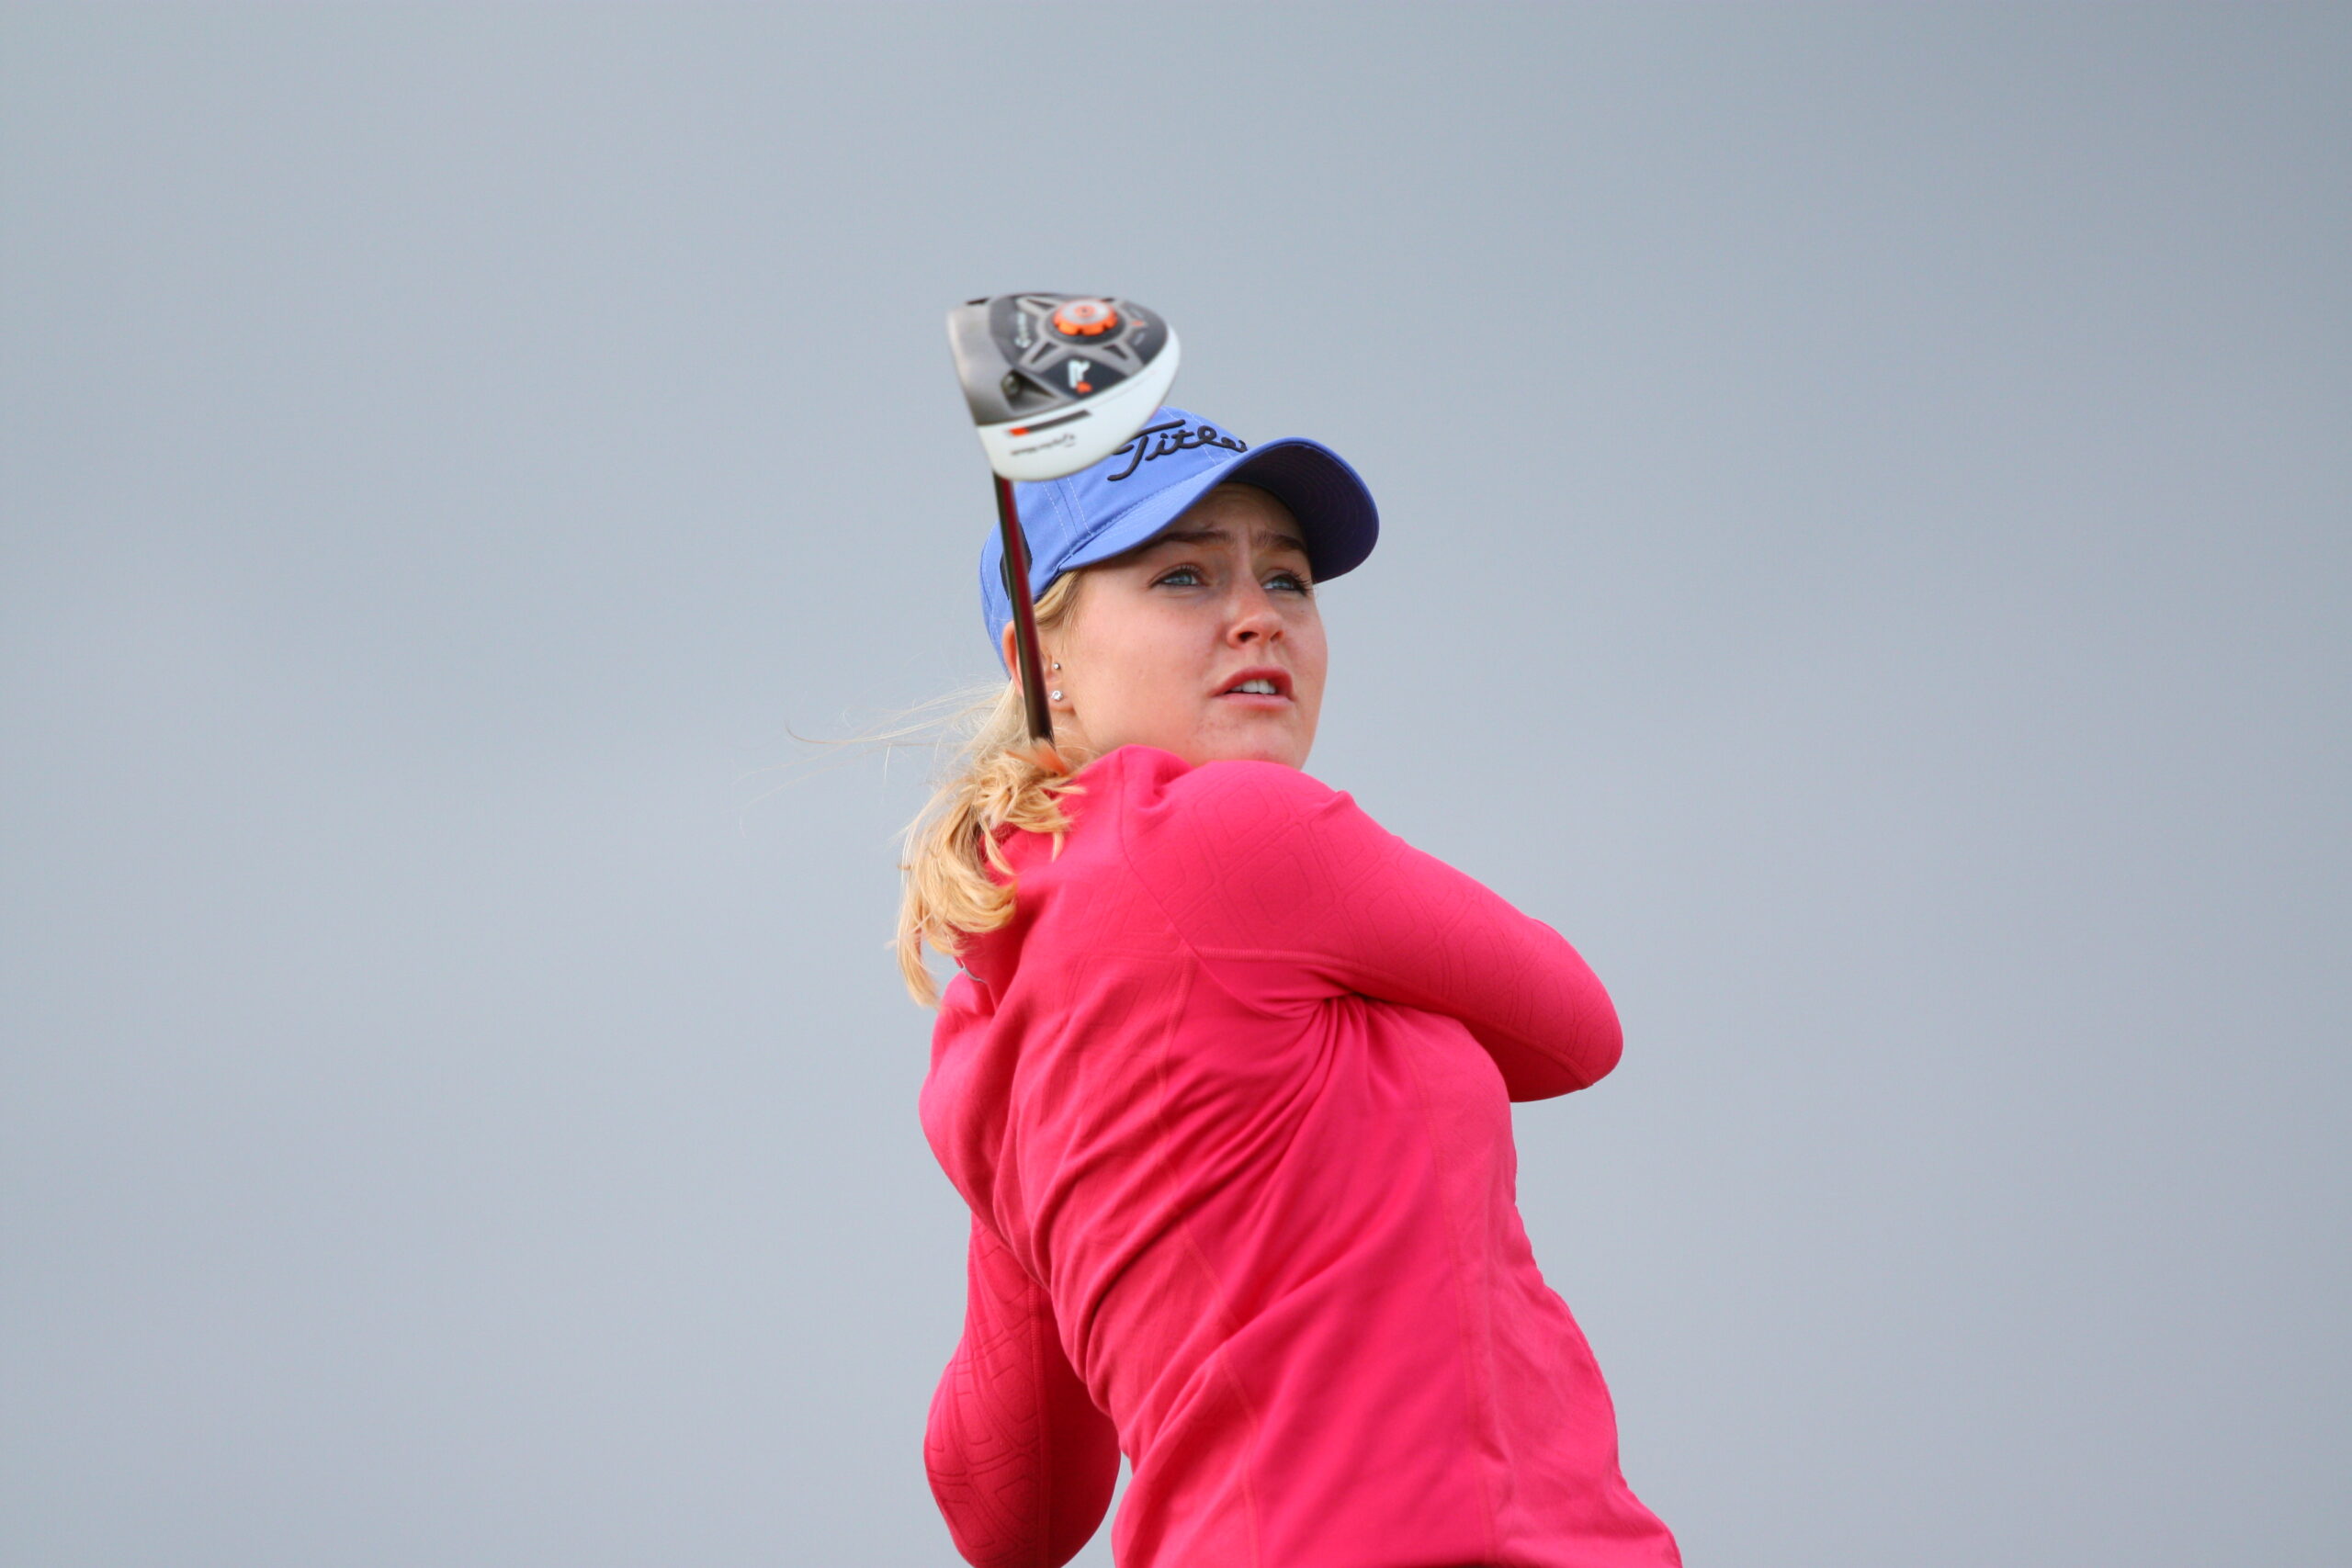 Charley Hull tests positive for coronavirus prior to the start of the 2020 ANA Inspiration